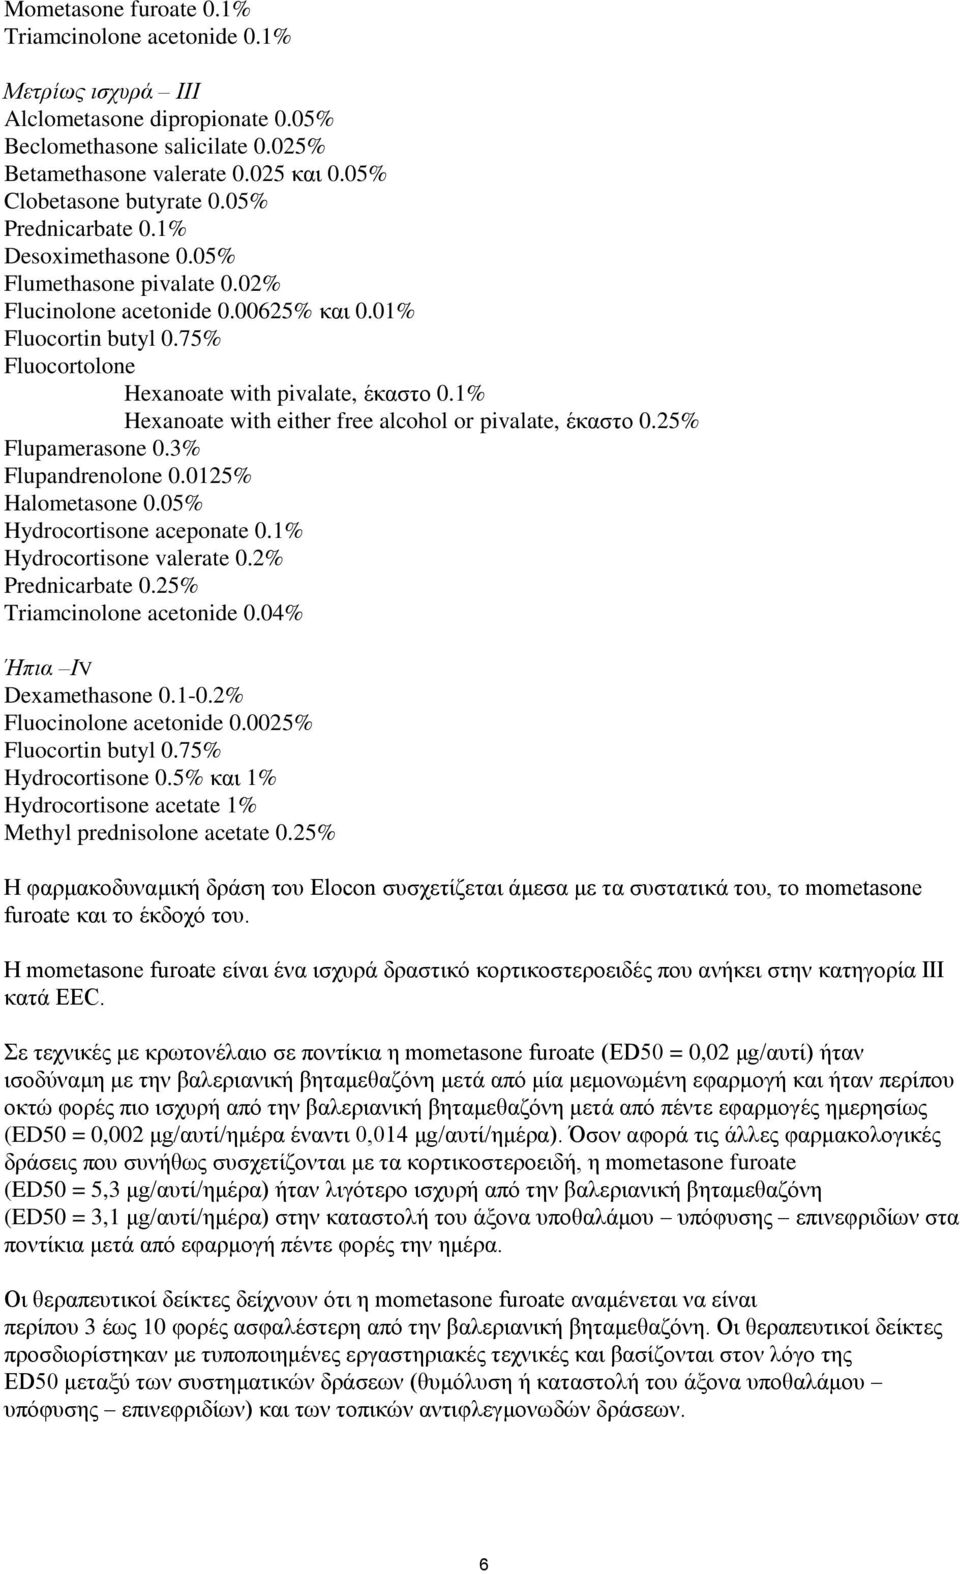 1% Hexanoate with either free alcohol or pivalate, έκαστο 0.25% Flupamerasone 0.3% Flupandrenolone 0.0125% Halometasone 0.05% Hydrocortisone aceponate 0.1% Hydrocortisone valerate 0.